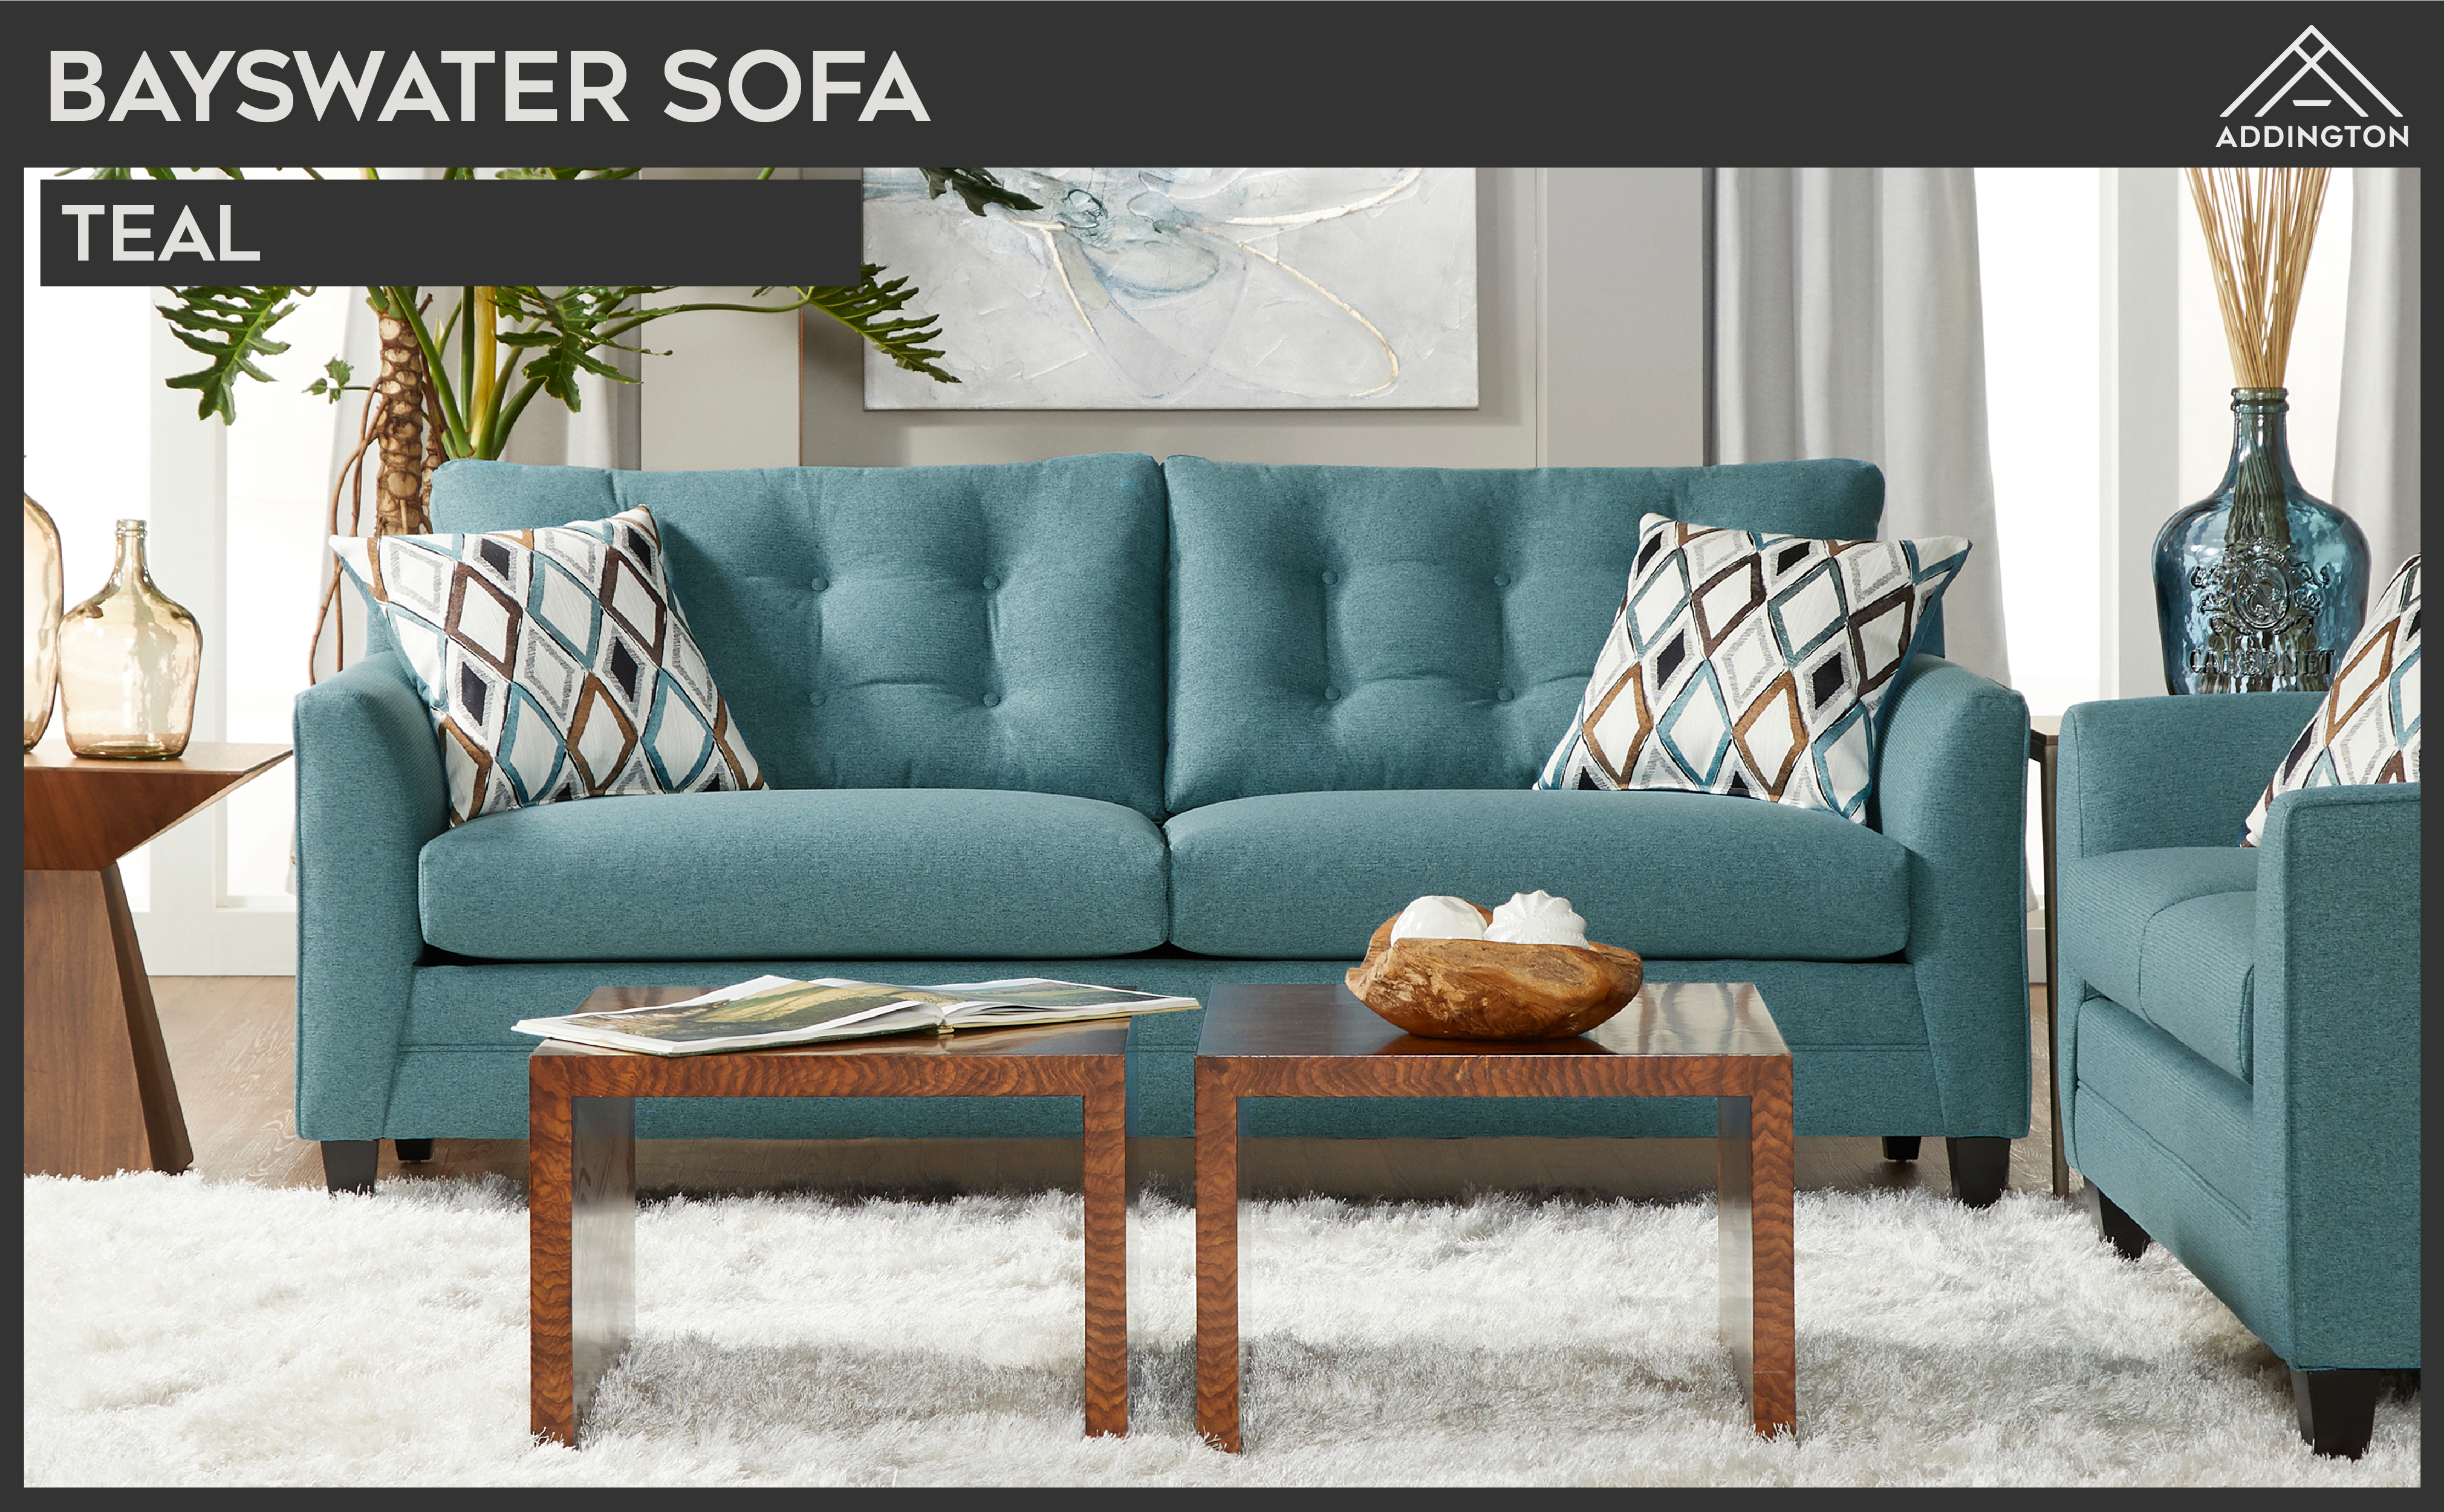 bayswater sofa lifestyle.png__PID:8a2b23e8-f473-471d-9e87-32d196cba9df